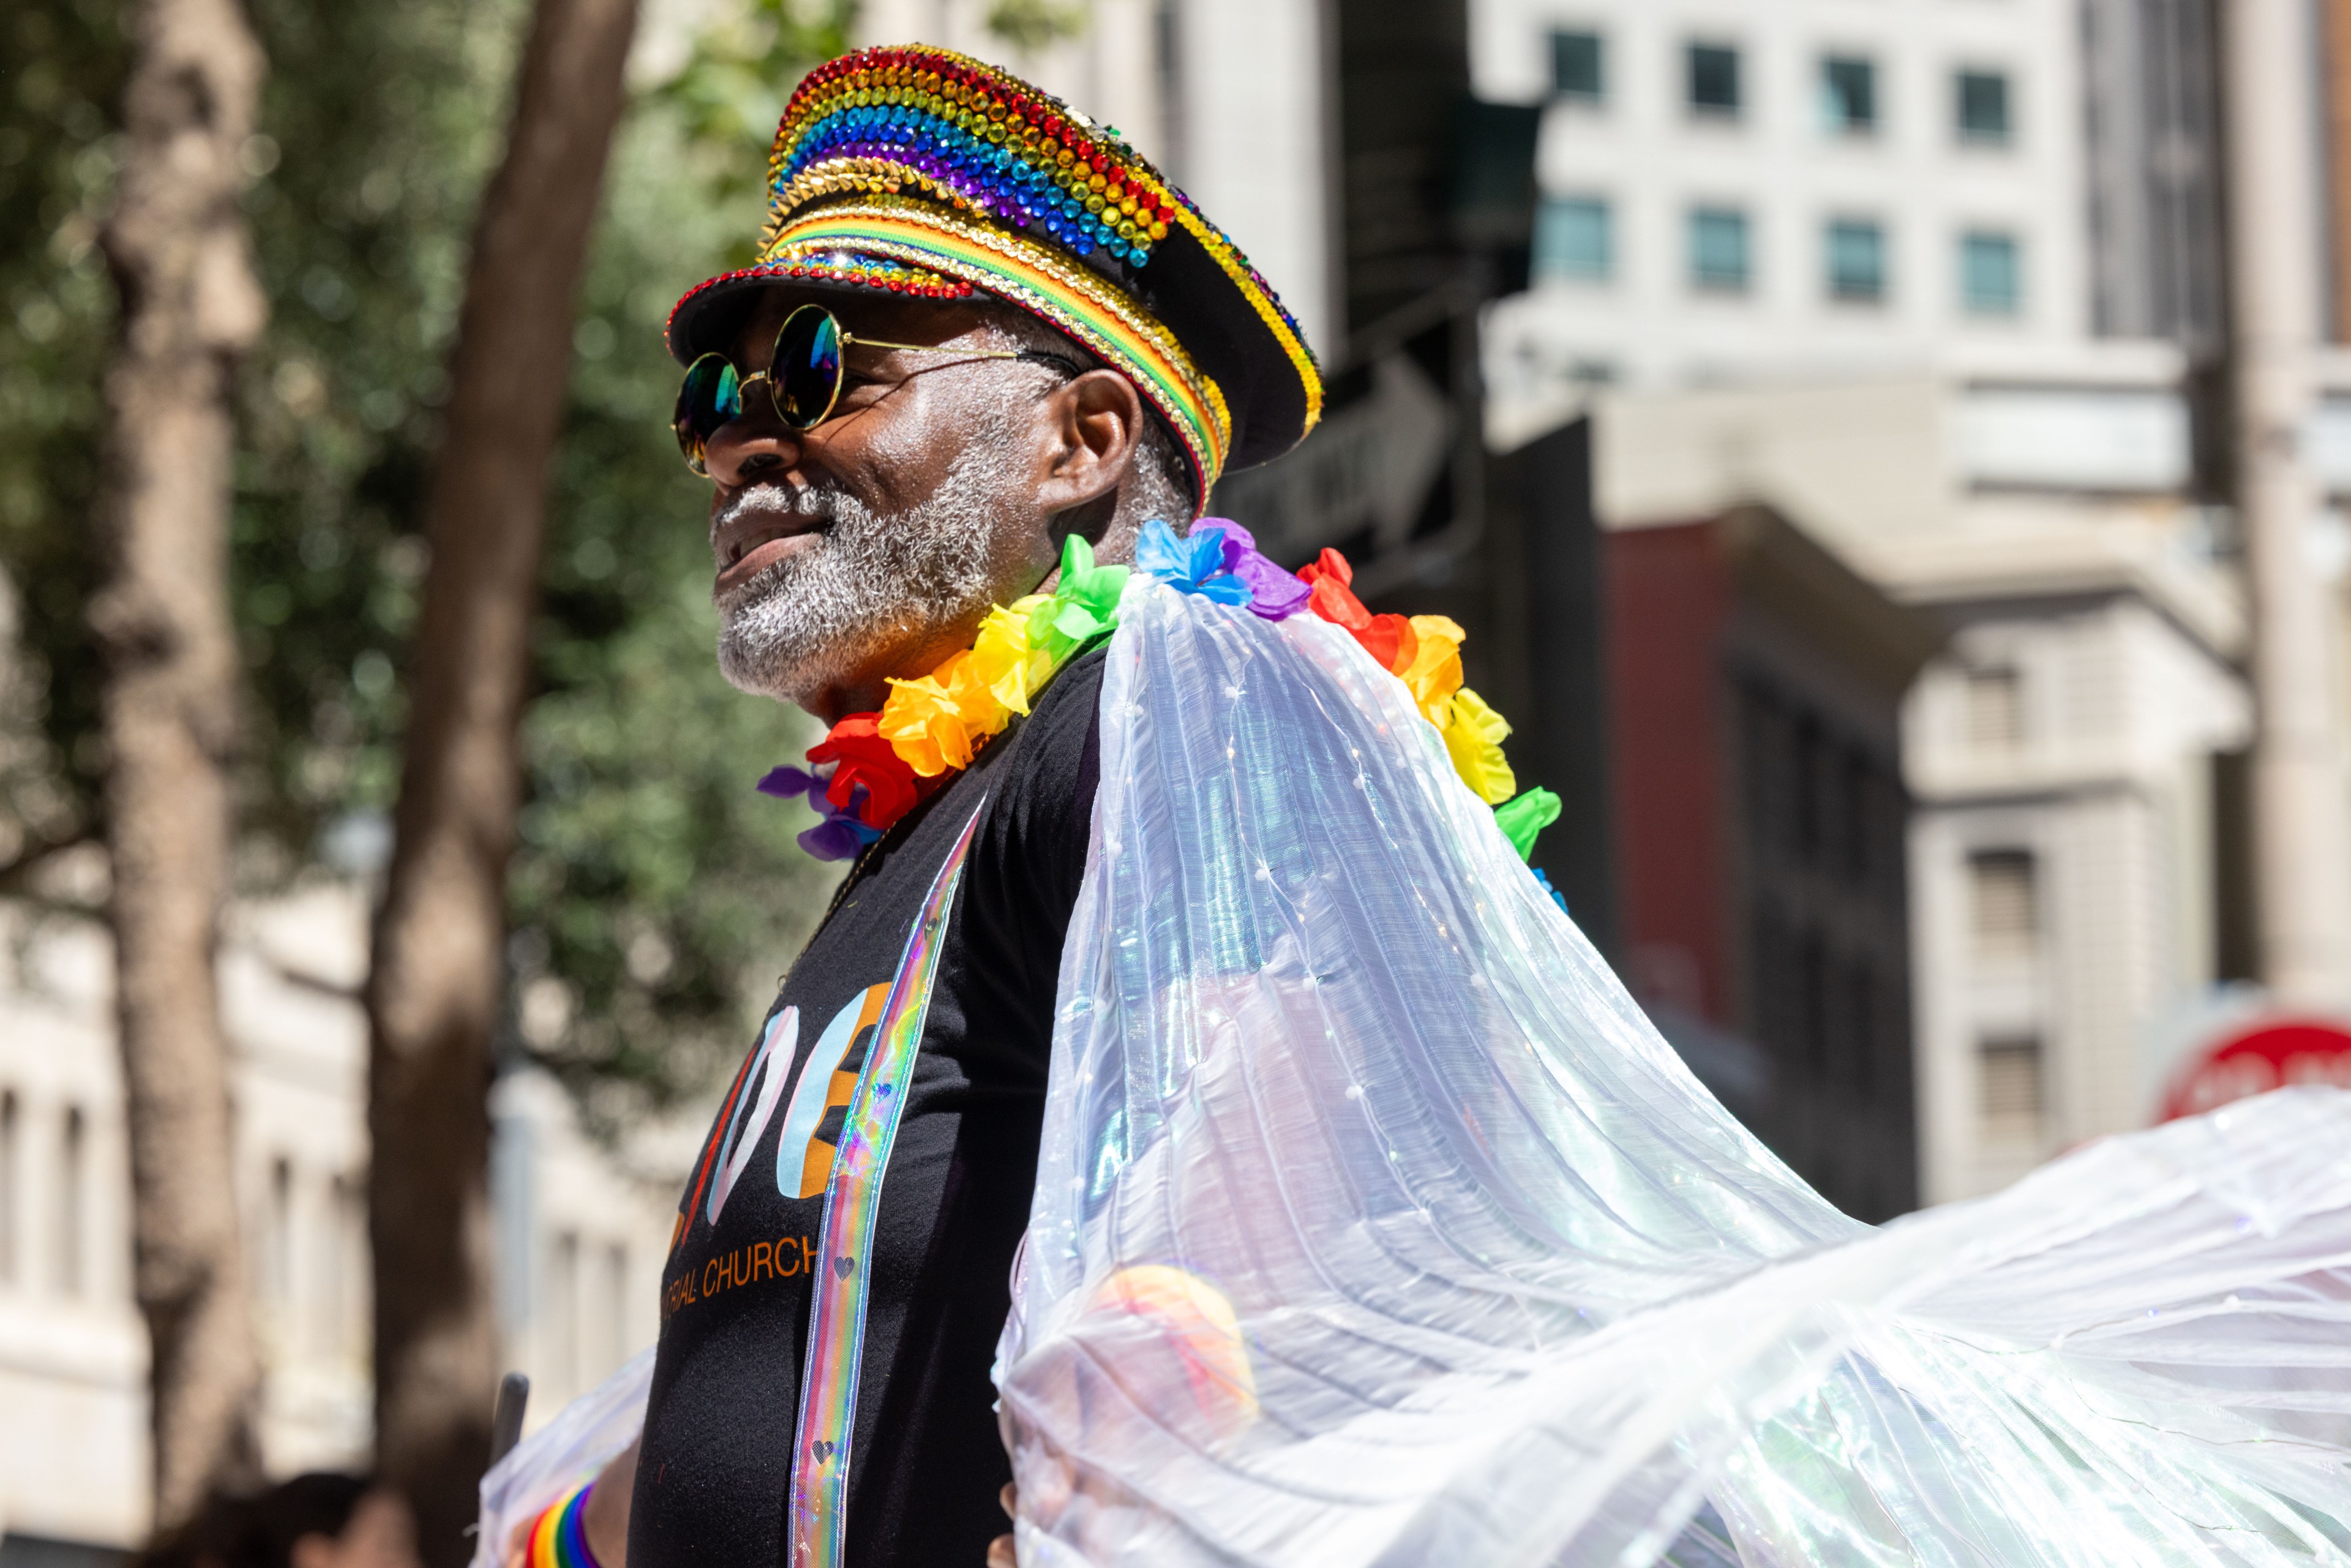 A man wears a colorful, sequin-covered hat and a rainbow lei. He has sunglasses on, a beard, and a black T-shirt with rainbow suspenders, draped in a sheer, iridescent fabric.